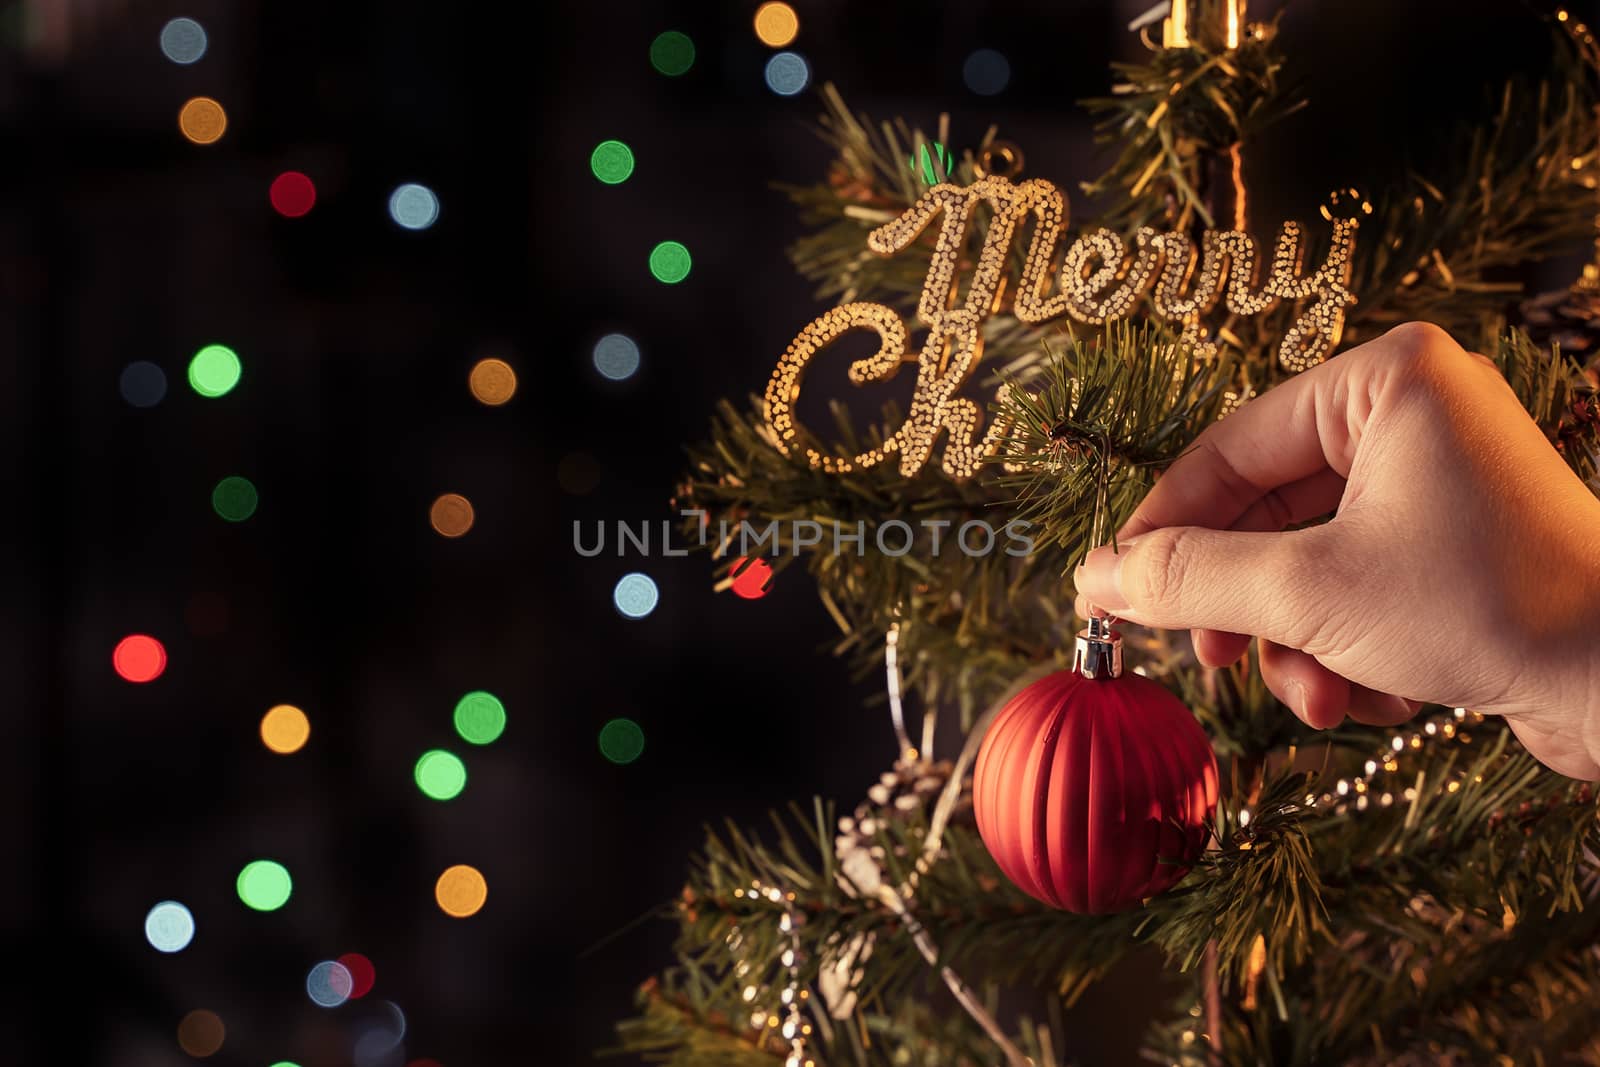 Christmas background concept- beautiful decor bauble hanging on the Christmas tree with sparkling light spot, blurry dark black background, copy space, close up.